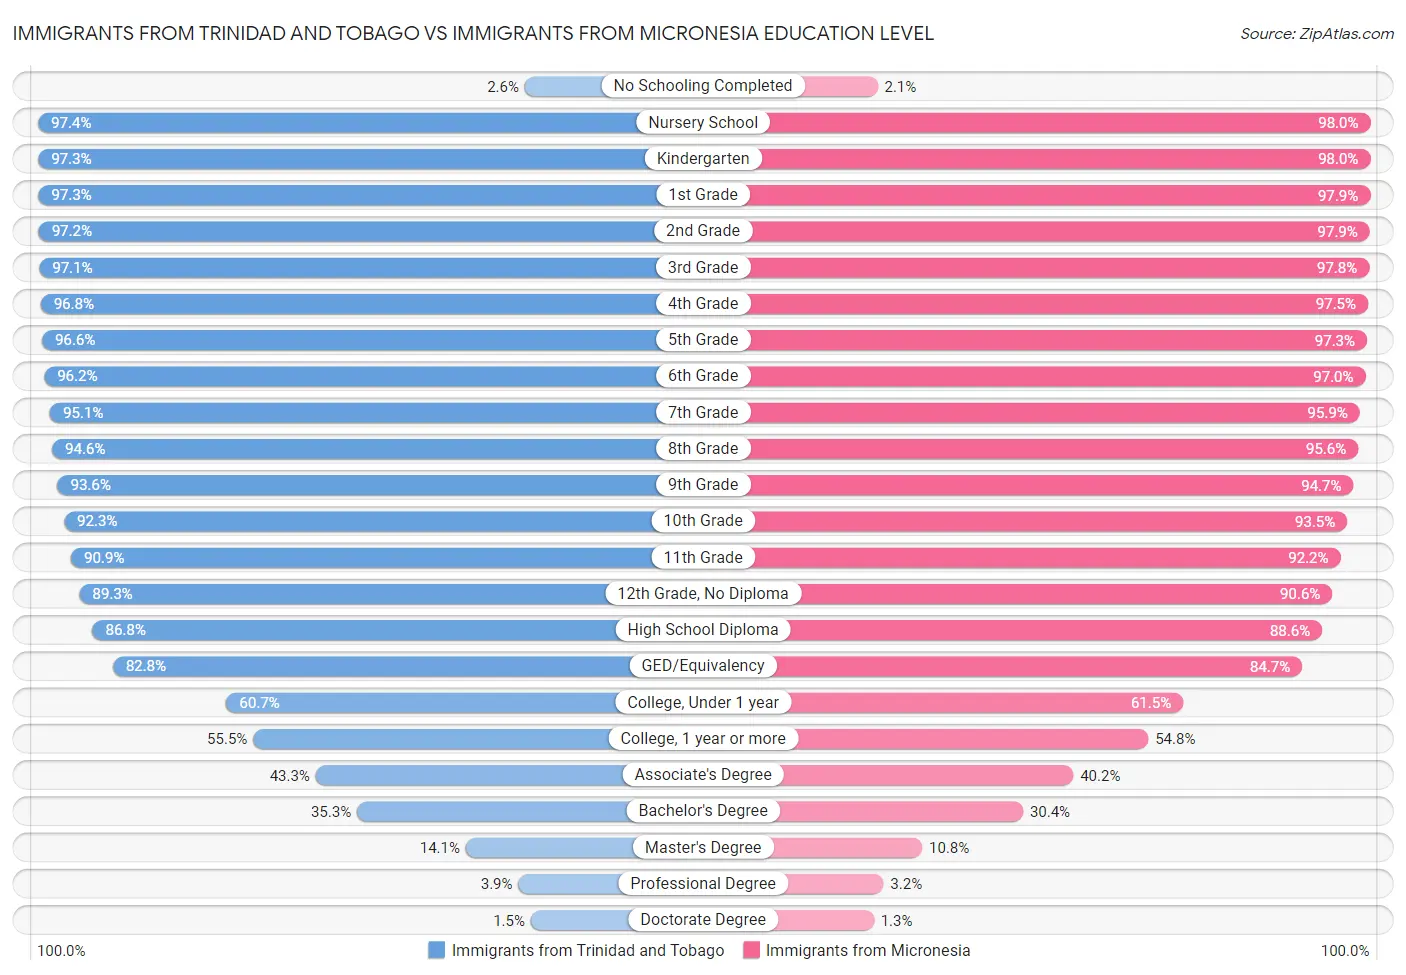 Immigrants from Trinidad and Tobago vs Immigrants from Micronesia Education Level